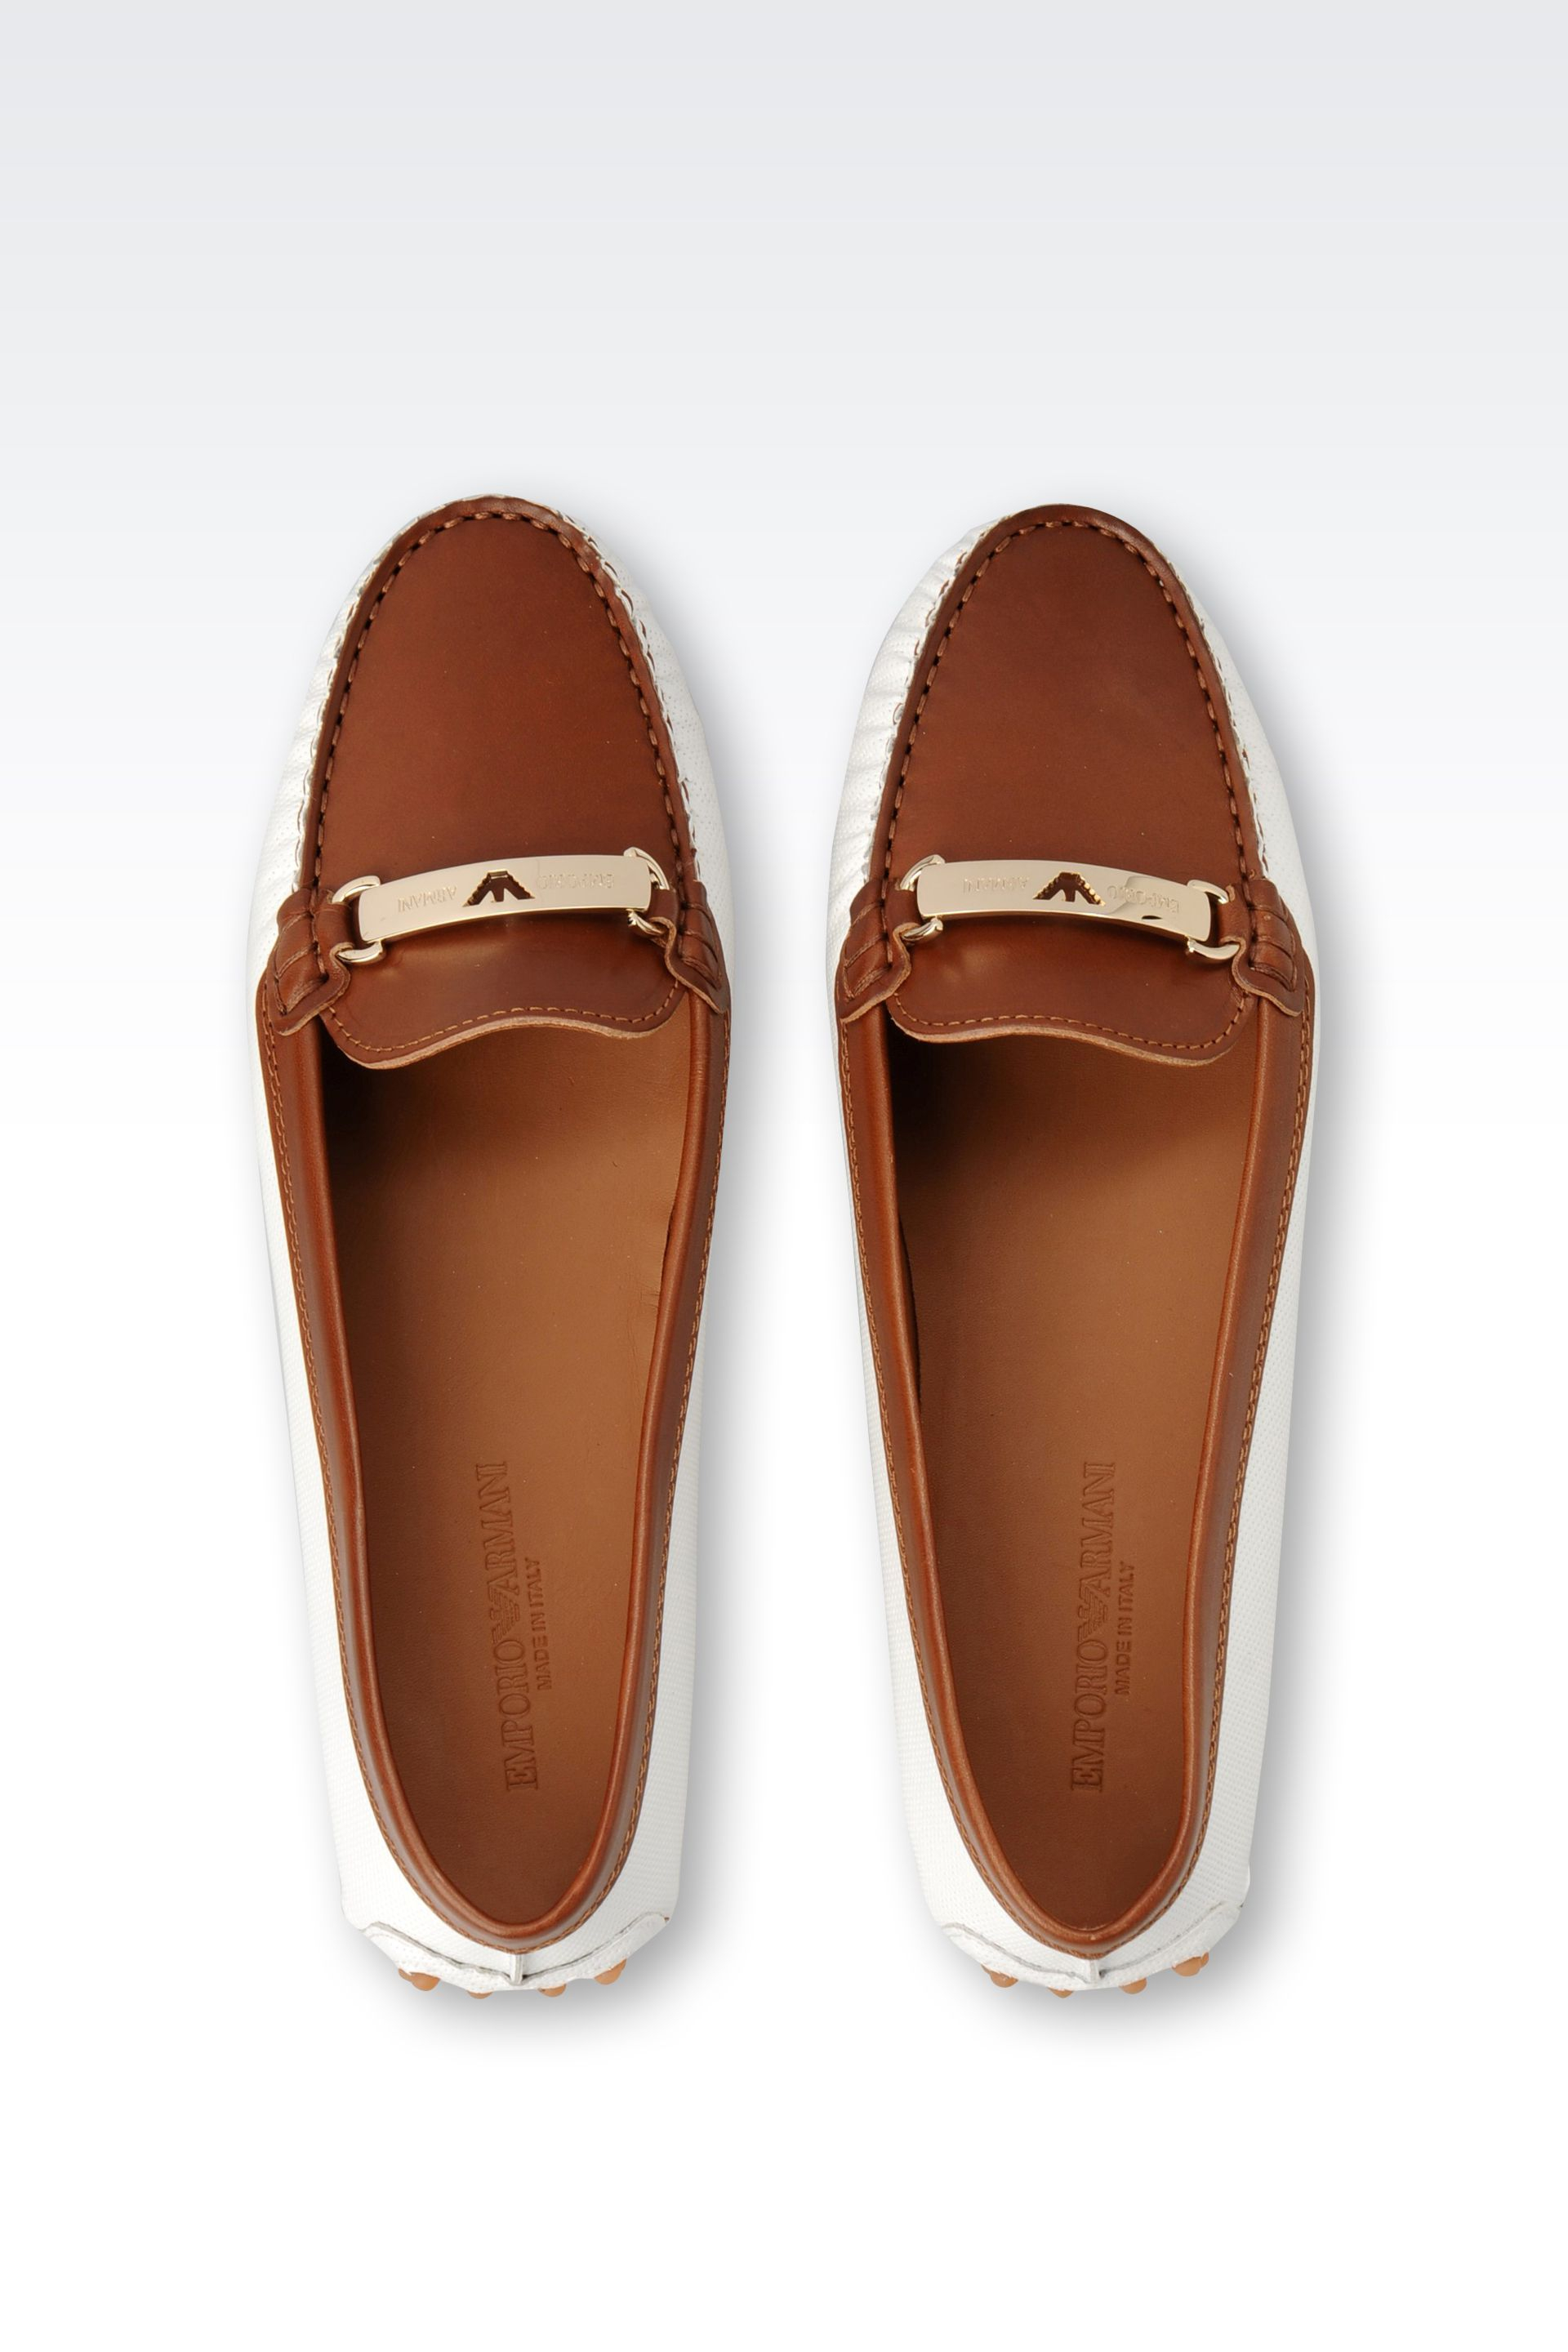 armani loafers womens